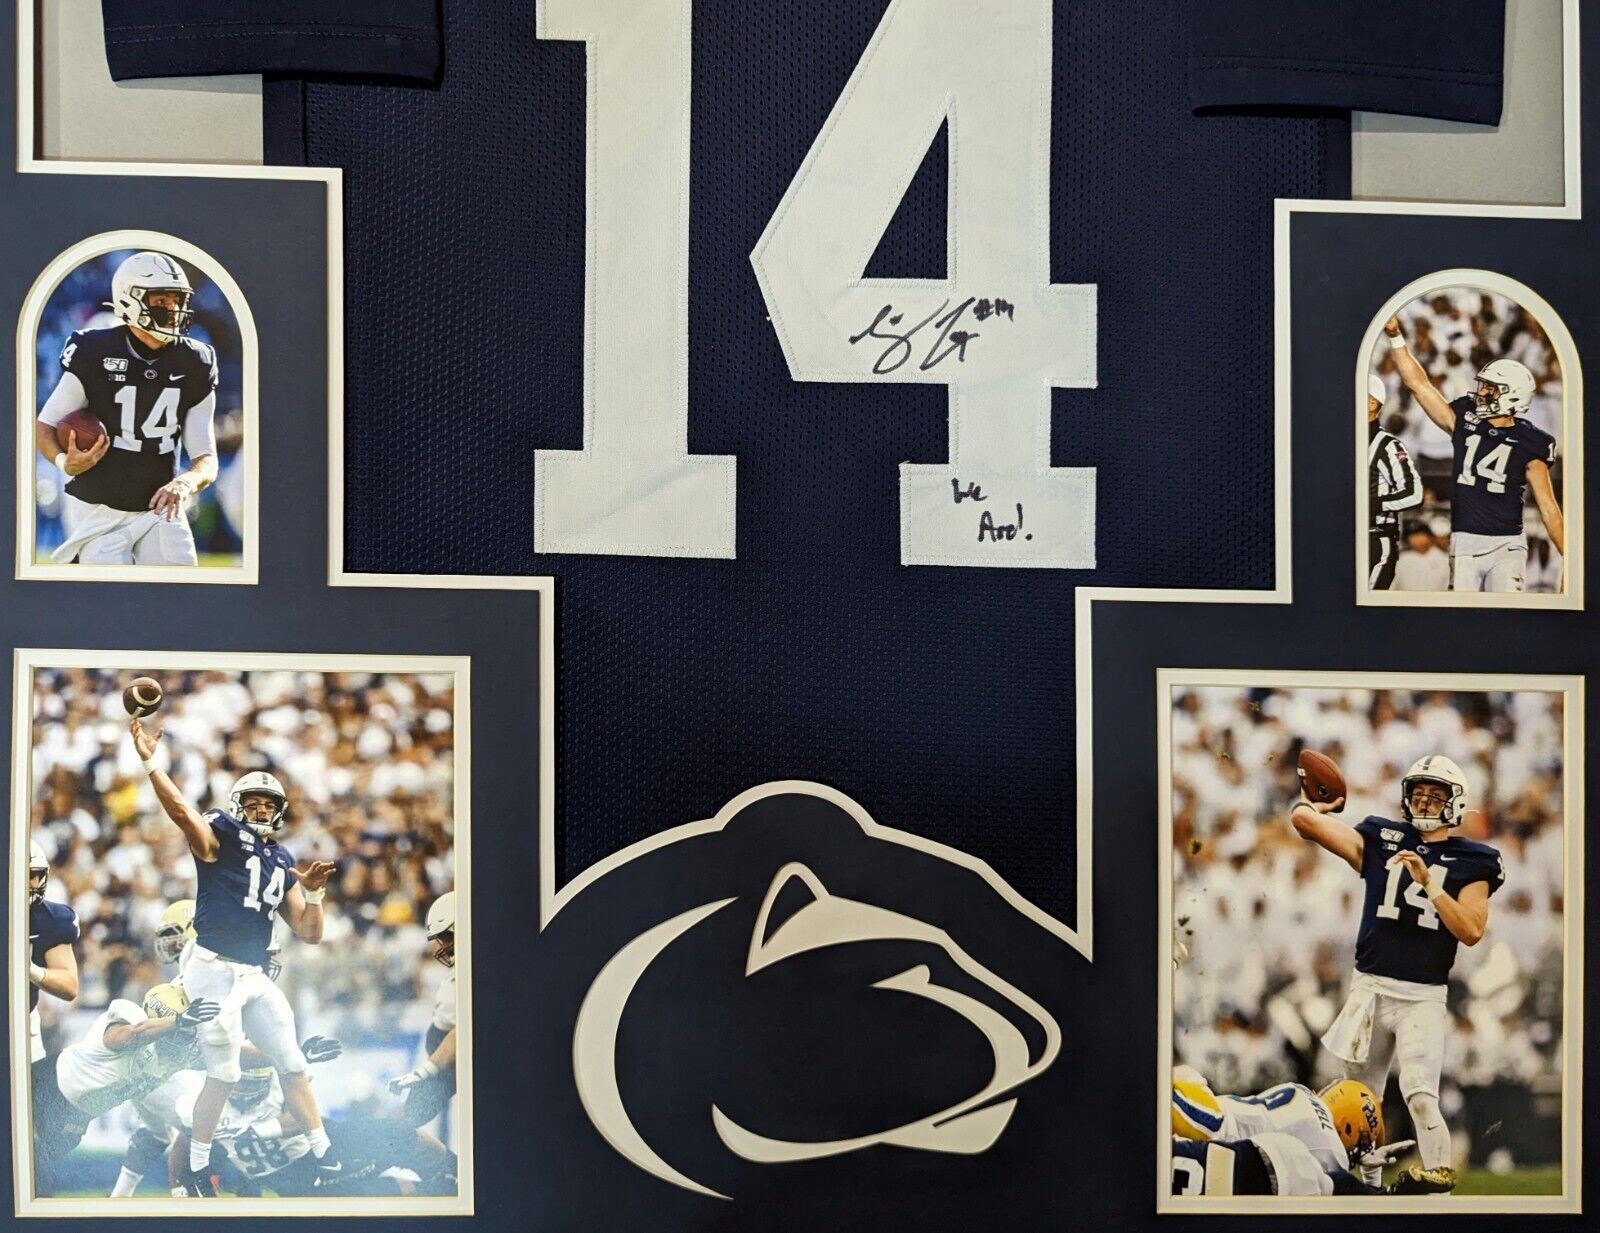 MVP Authentics Framed Penn State Nittany Lions Sean Clifford Signed Inscribed Jersey Jsa Coa 405 sports jersey framing , jersey framing